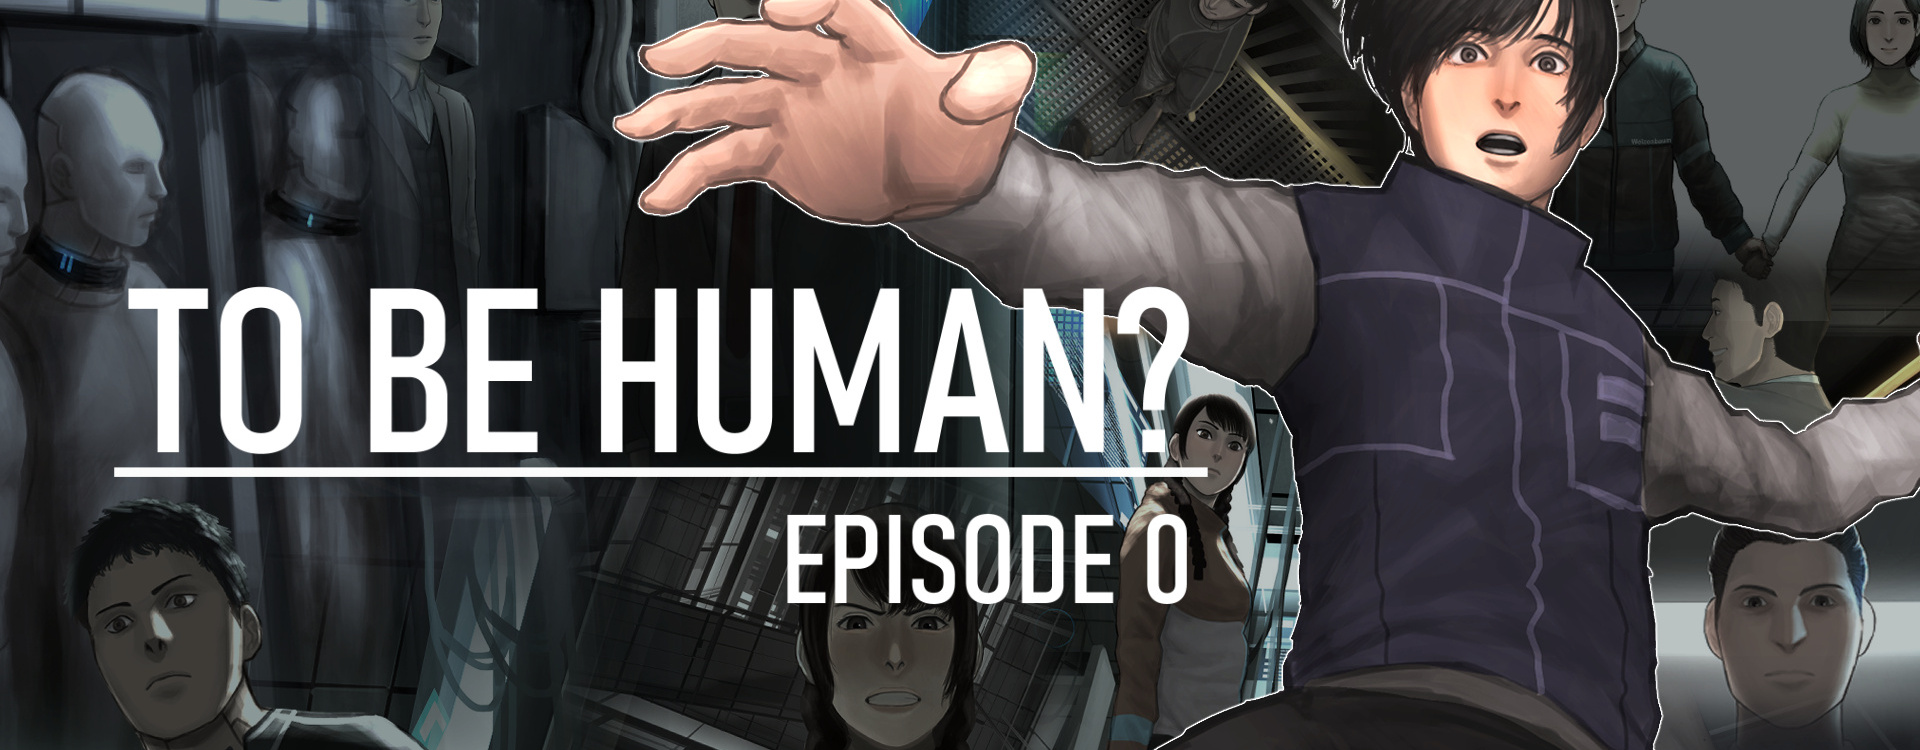 To Be Human? Episode0